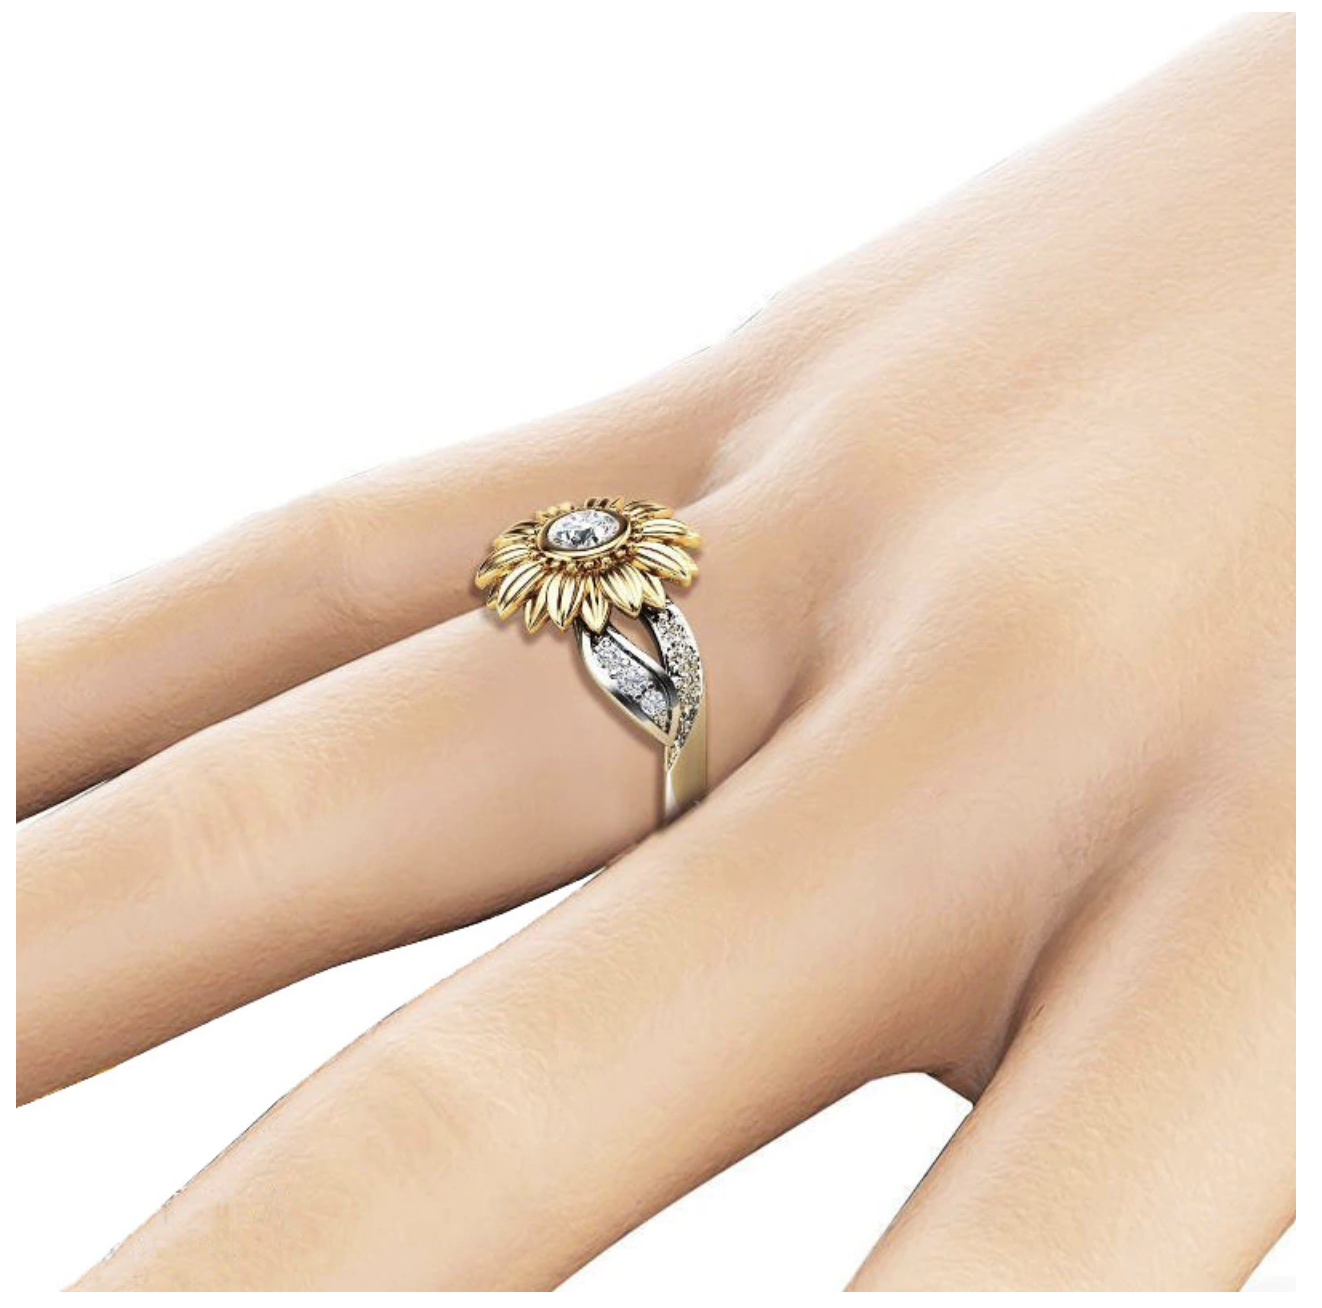 EXQUISITE SILVER CRYSTAL SUNFLOWER RING